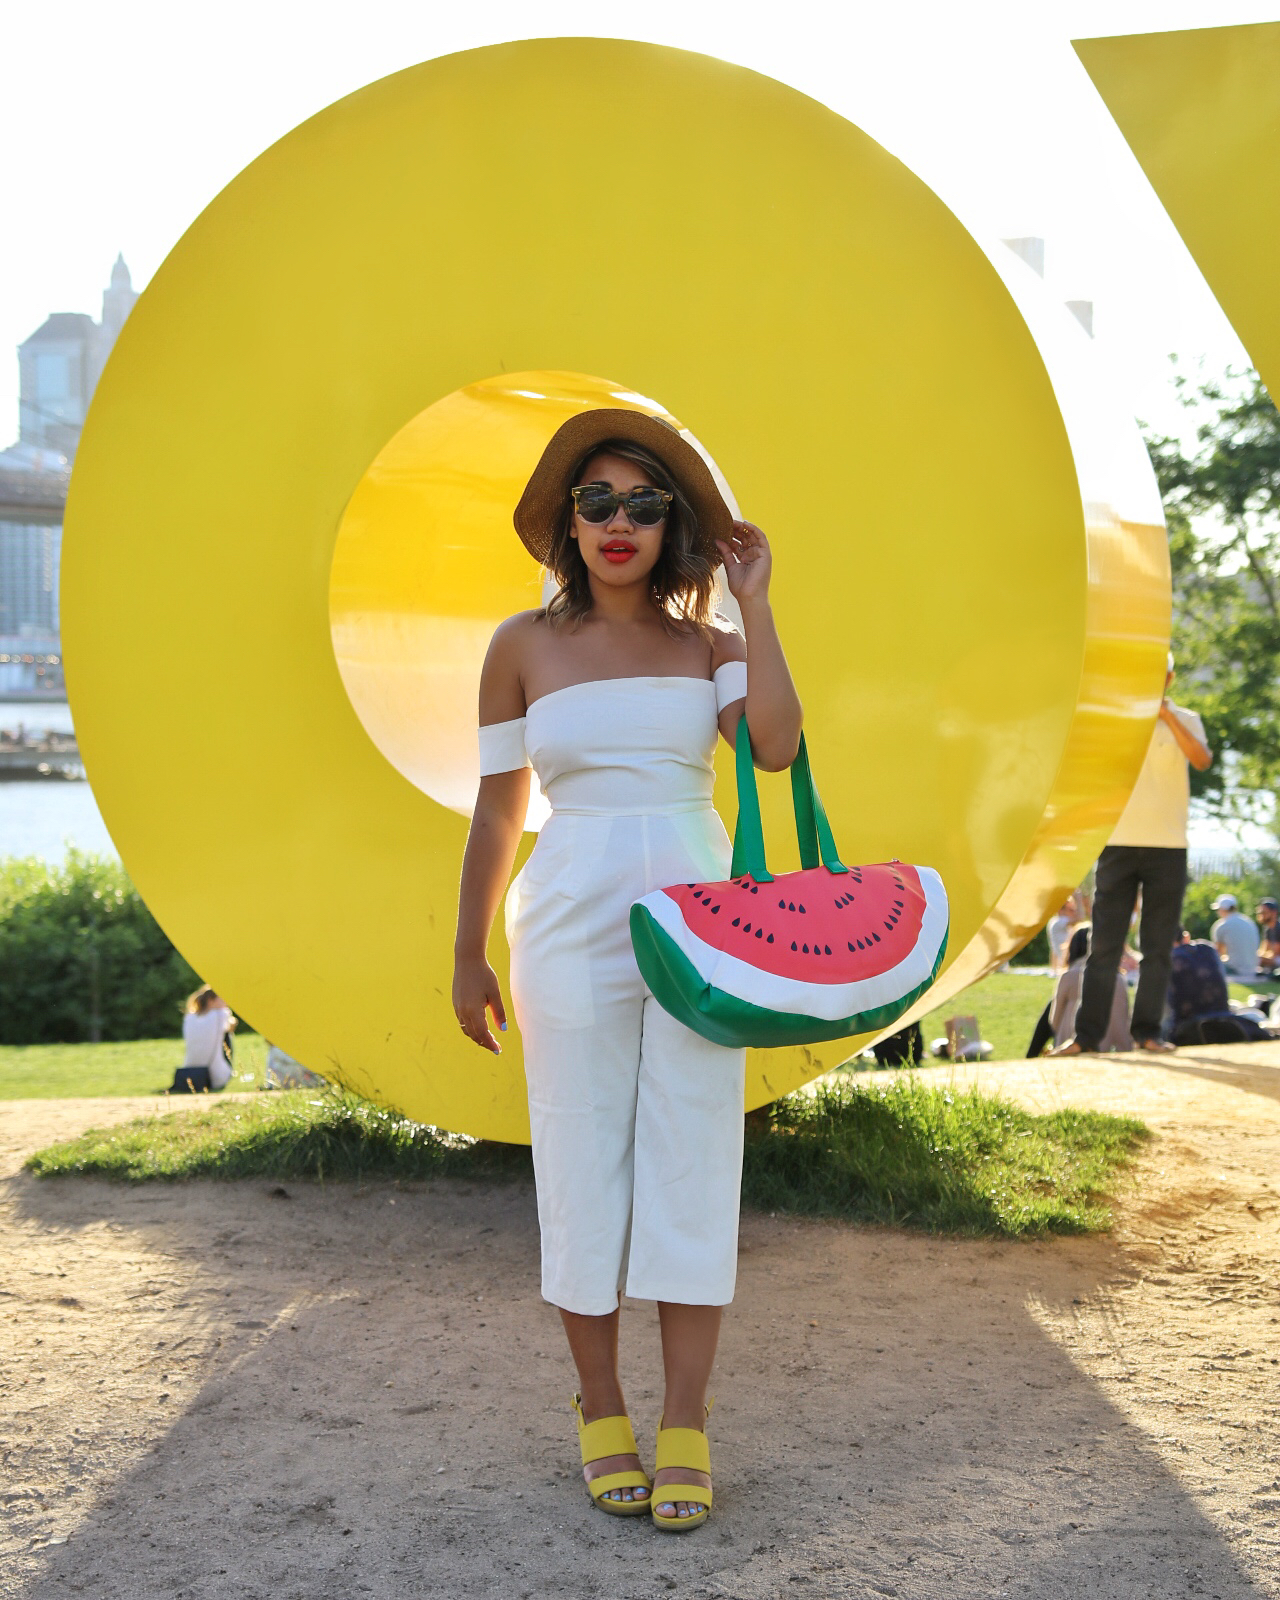 Color Me Courtney - Little White Jumpsuit // Jumpsuit >> http://bit.ly/littlewhitejumpsuit // Heels: http://bit.ly/yellow_sandals // bag: http://bit.ly/watermelonbagg